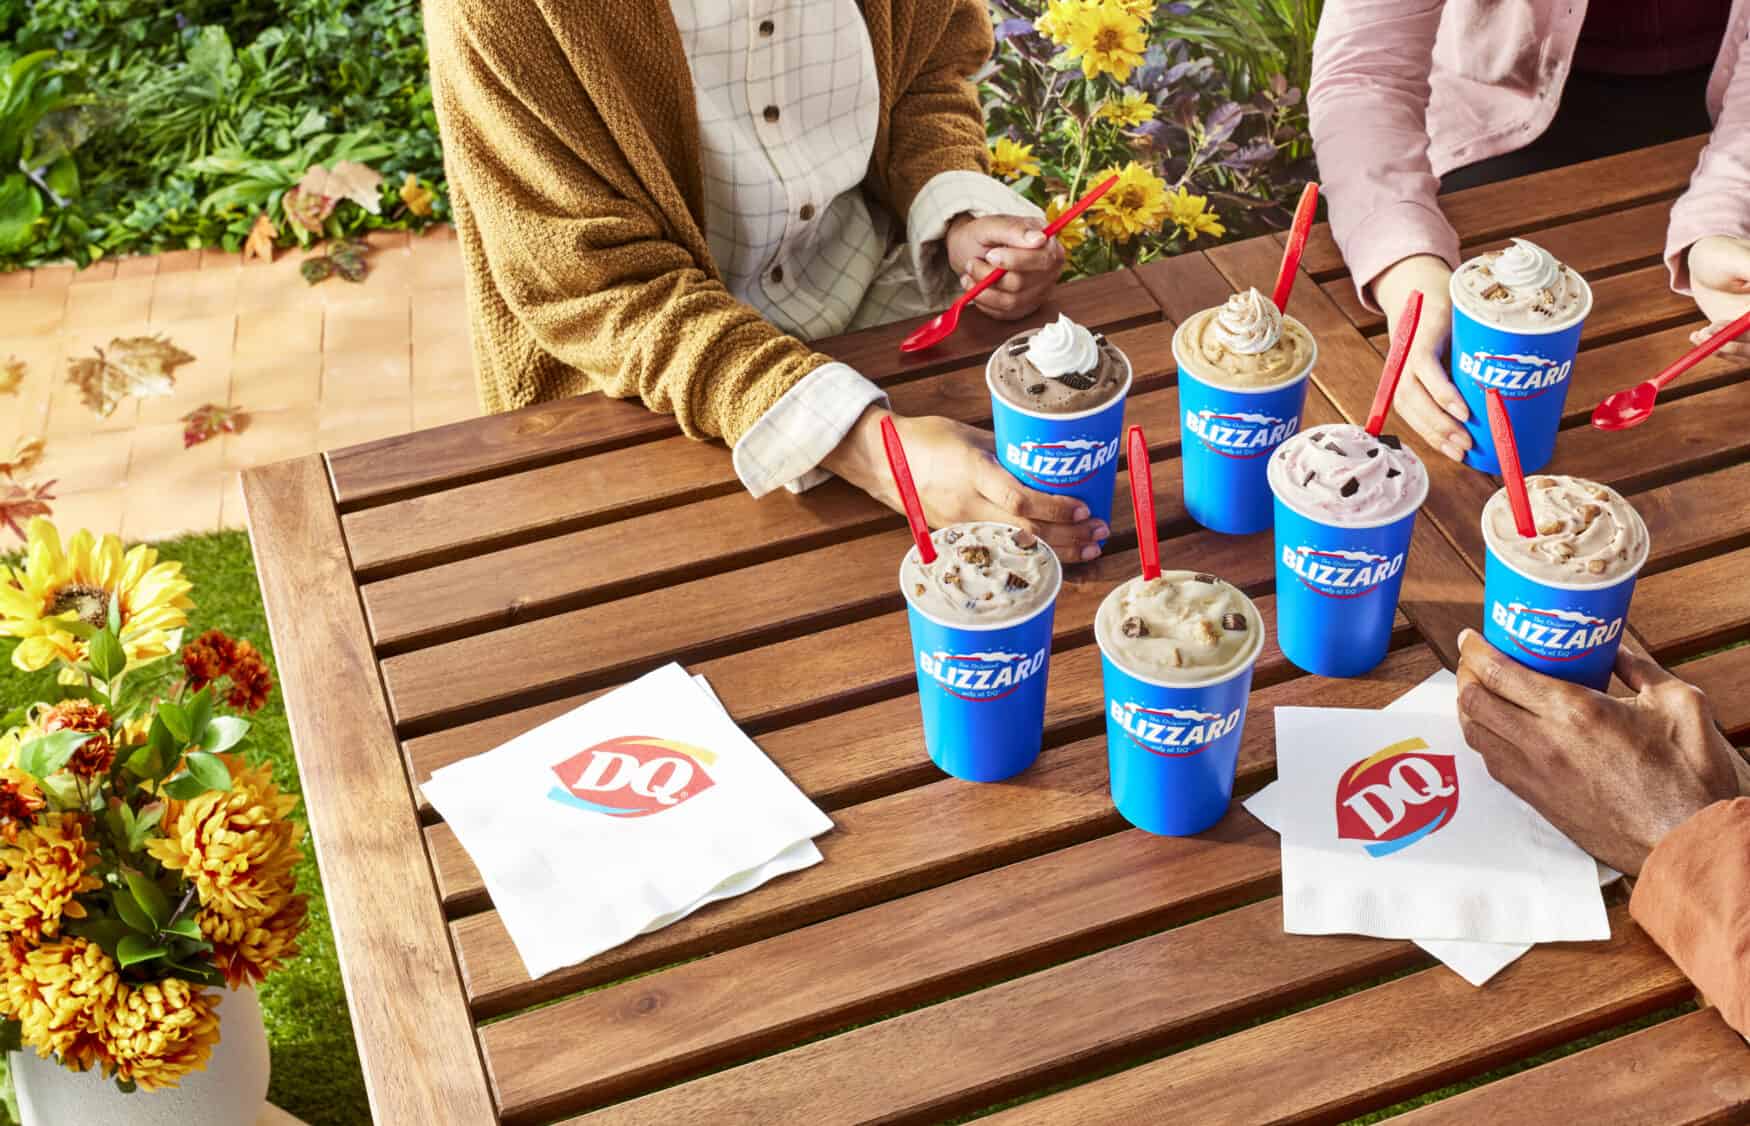 DQ Blizzard just 85 cents, see Fall flavors now